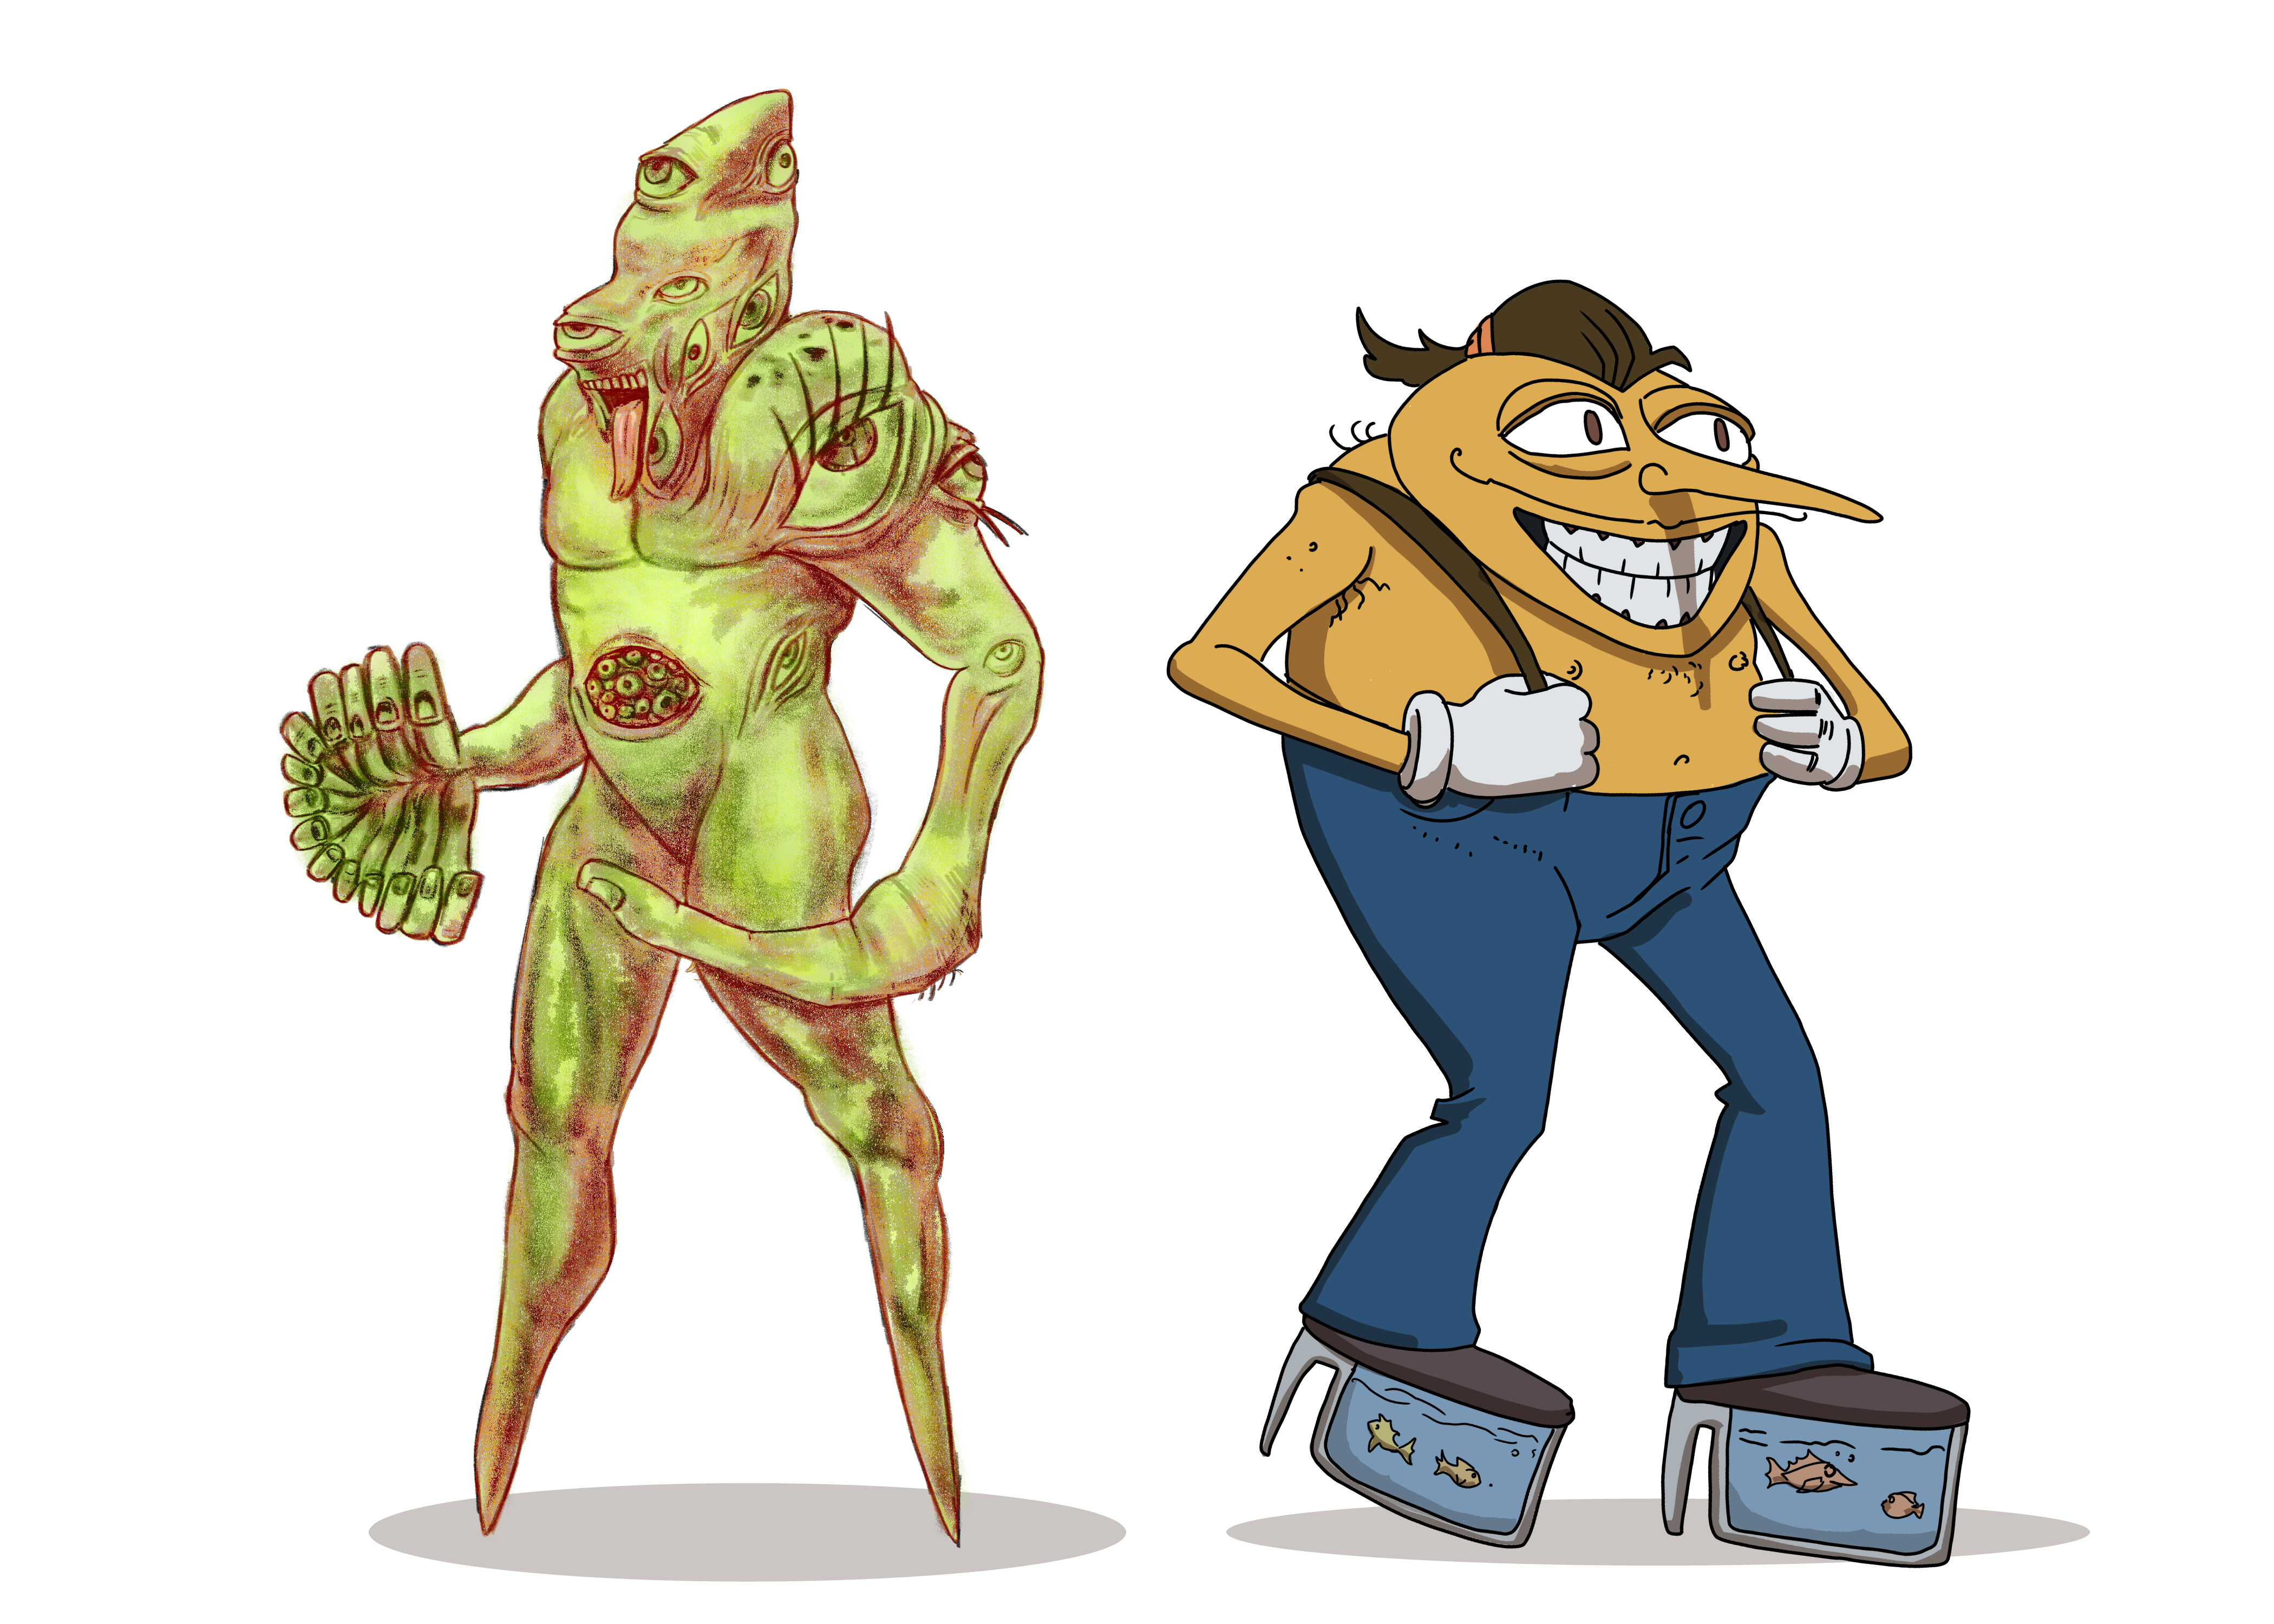 strange characters, character design, Wesley Edwards art, weird character design, 